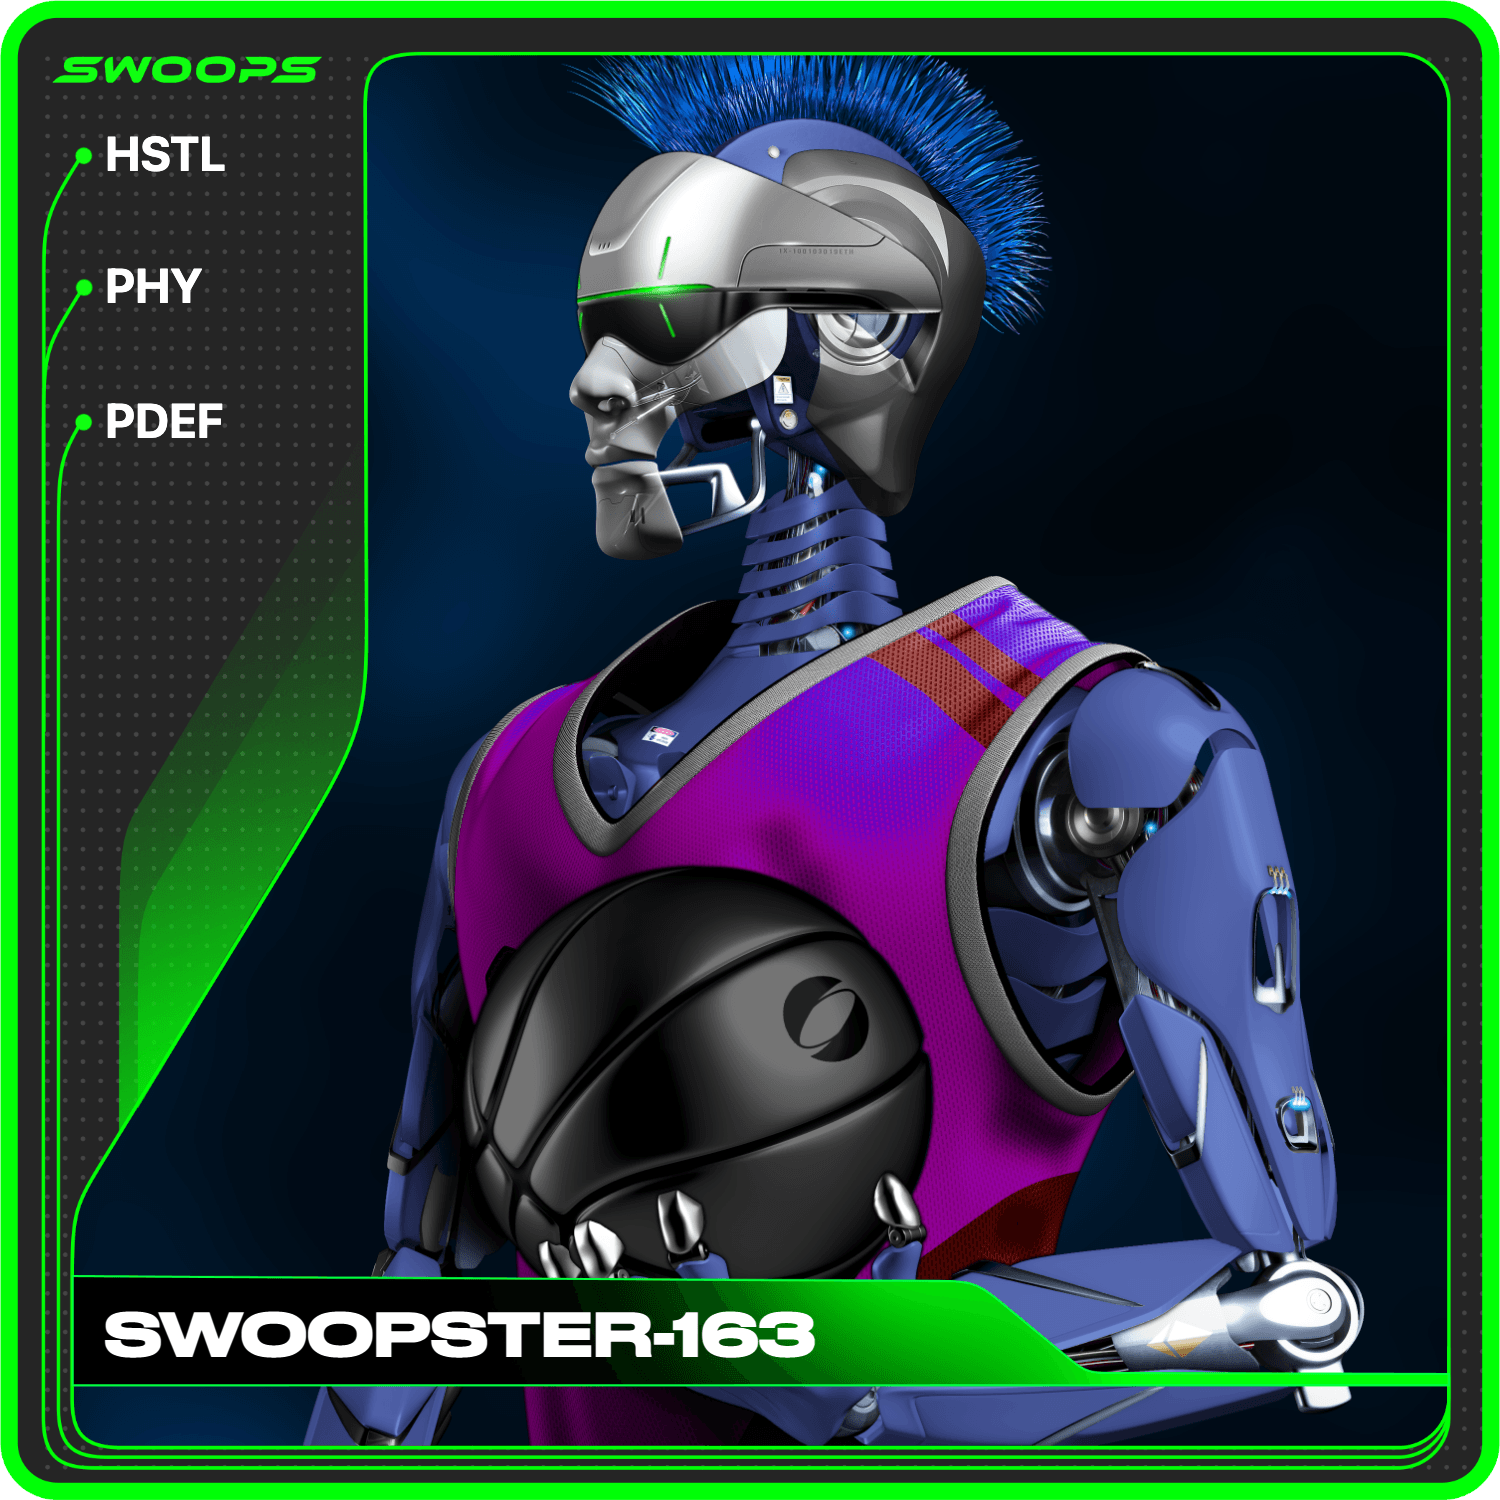 SWOOPSTER-163